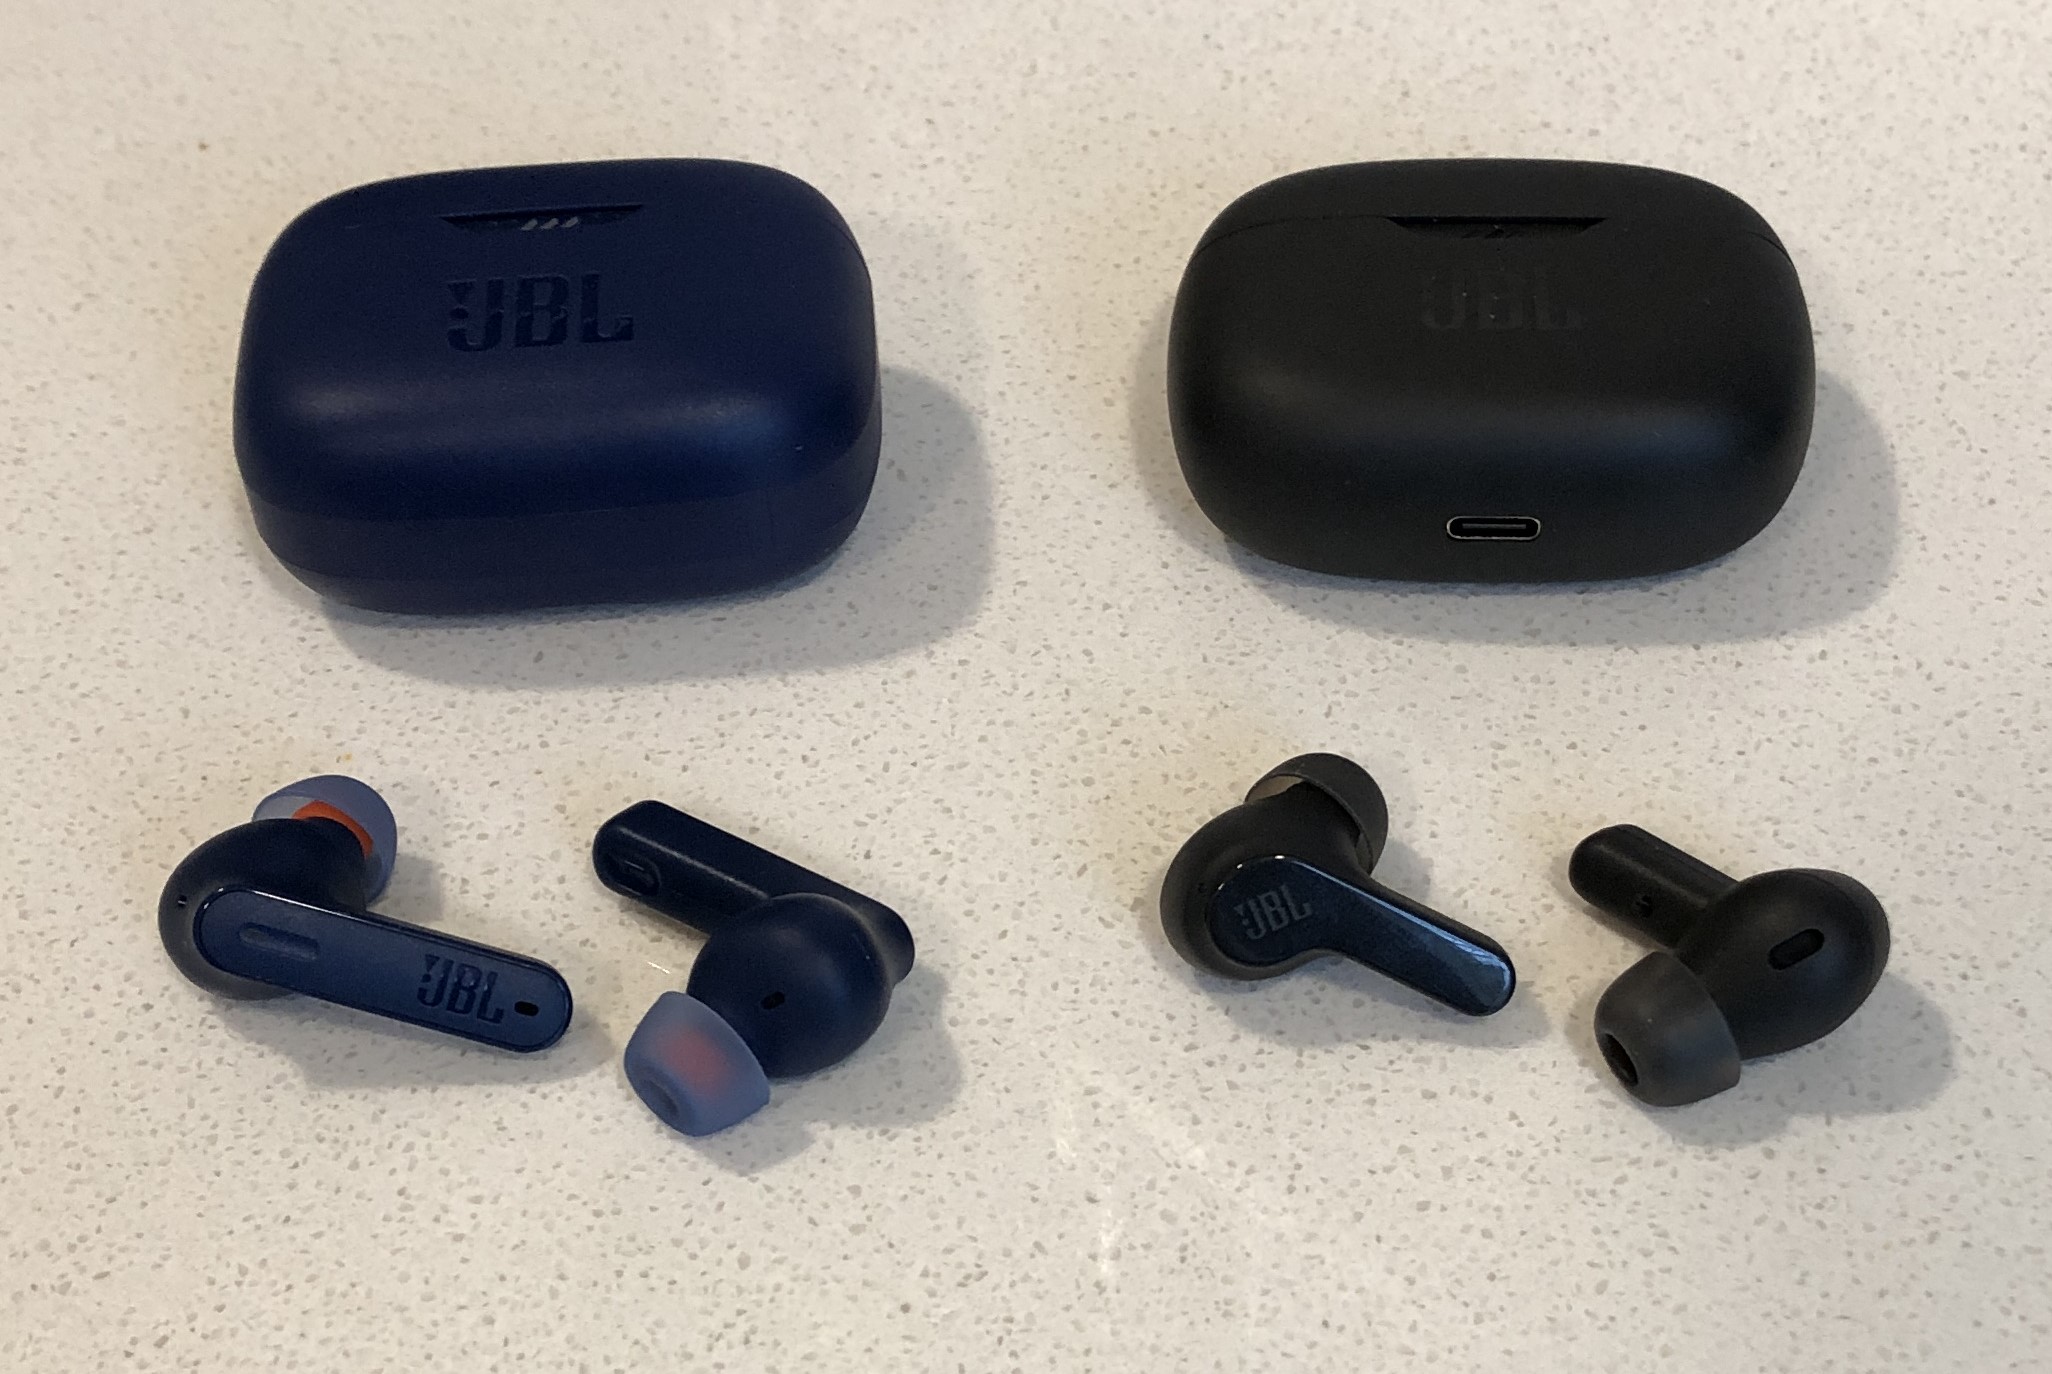 JBL Tune 230NC vs Vibe Beam earbuds and case